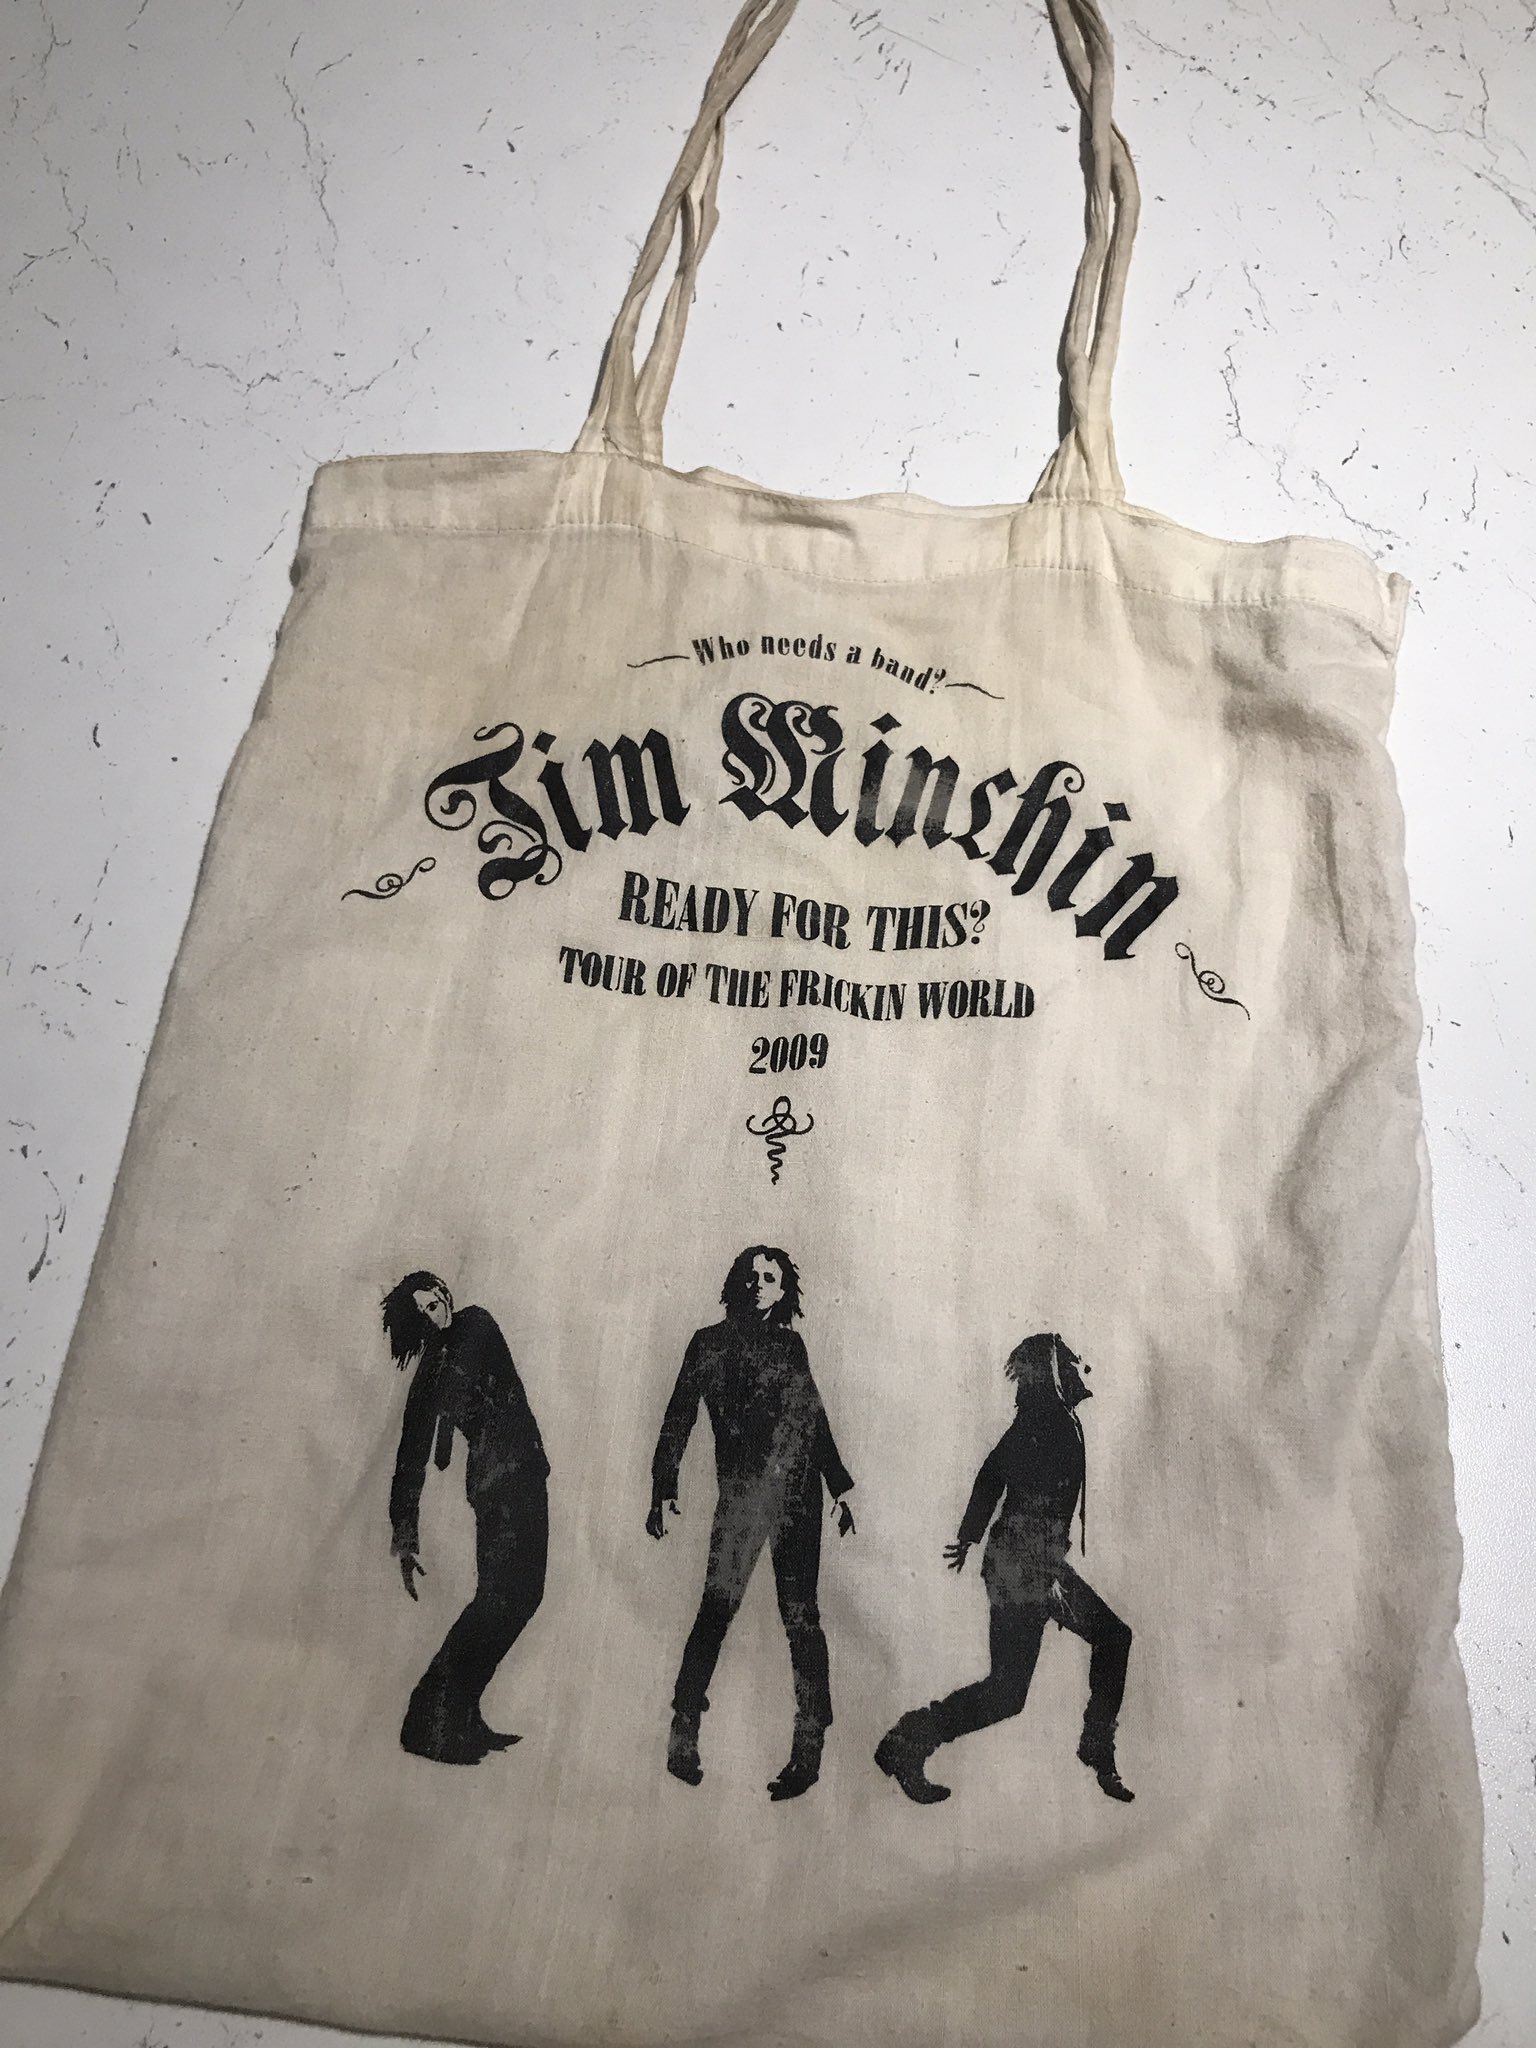 katiesaurus (Taylor's version) on Twitter: "Another with my @timminchin canvas bag! 12 years and still looking 🤩" / Twitter